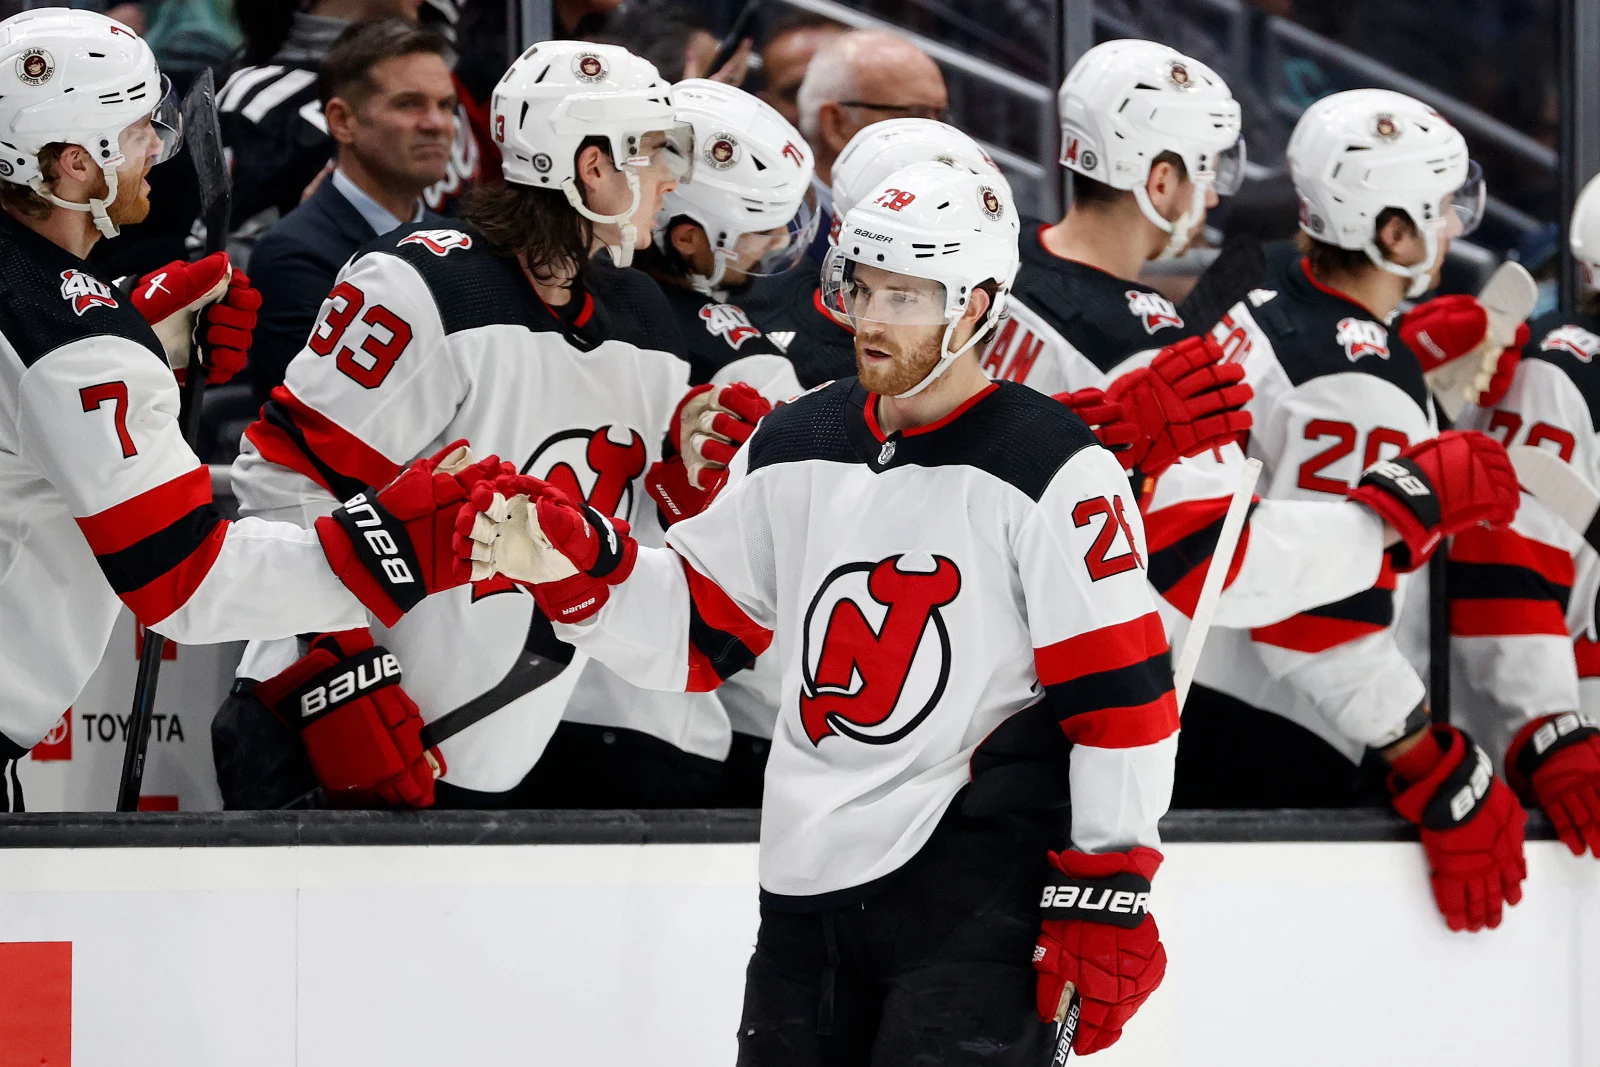 The NJ devils Even non-hockey-fans love this Cinderella story